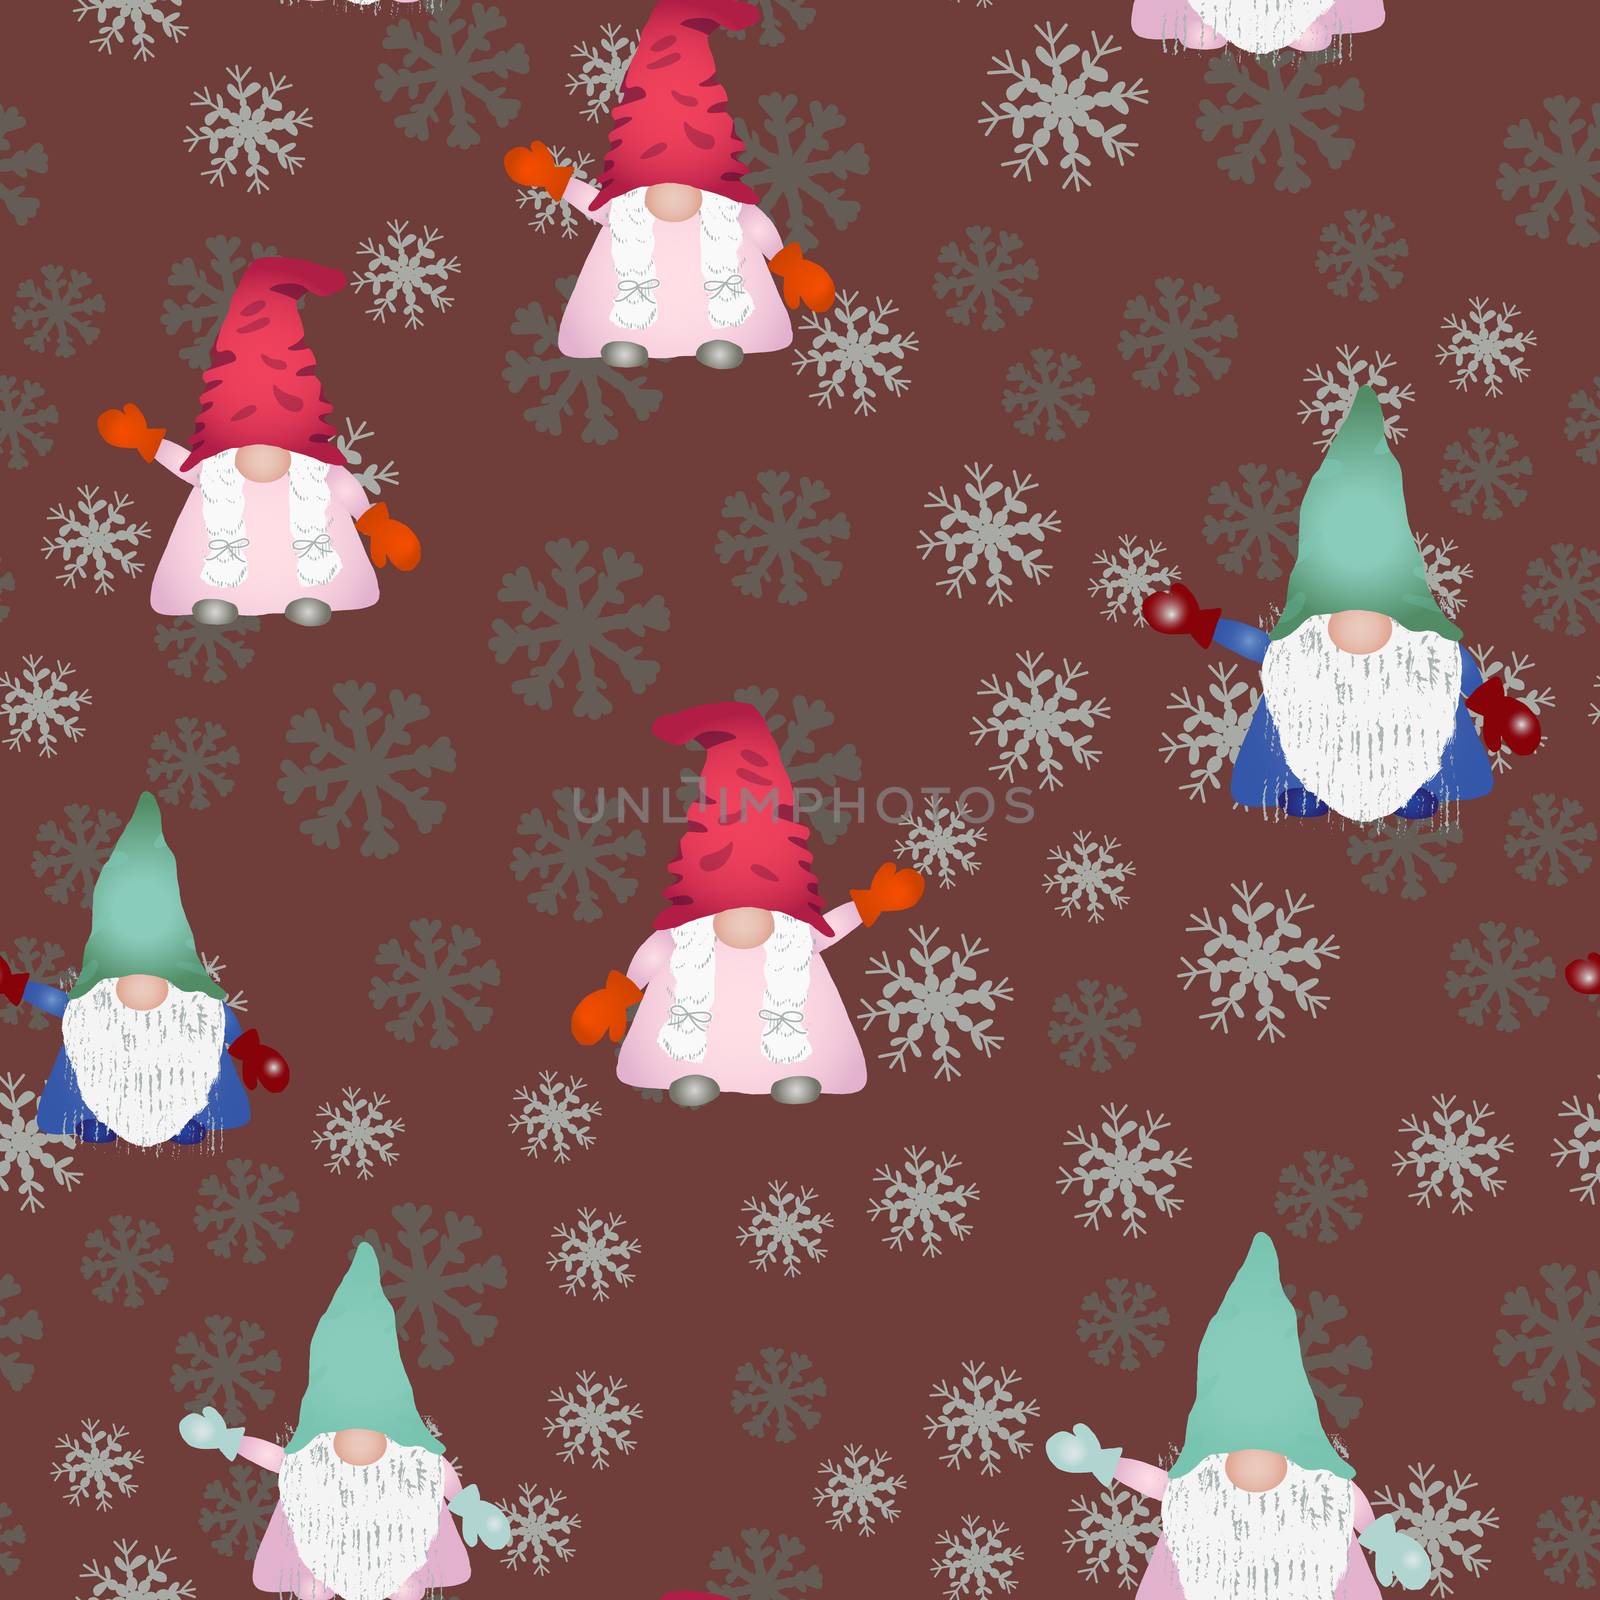 Christmas scandinavian gnomes seamless pattern on brown. Hand drawn dwarf or elf fairytale characters with snowflakes. Wallpaper, textile, wrapping paper design. Vector illustration.